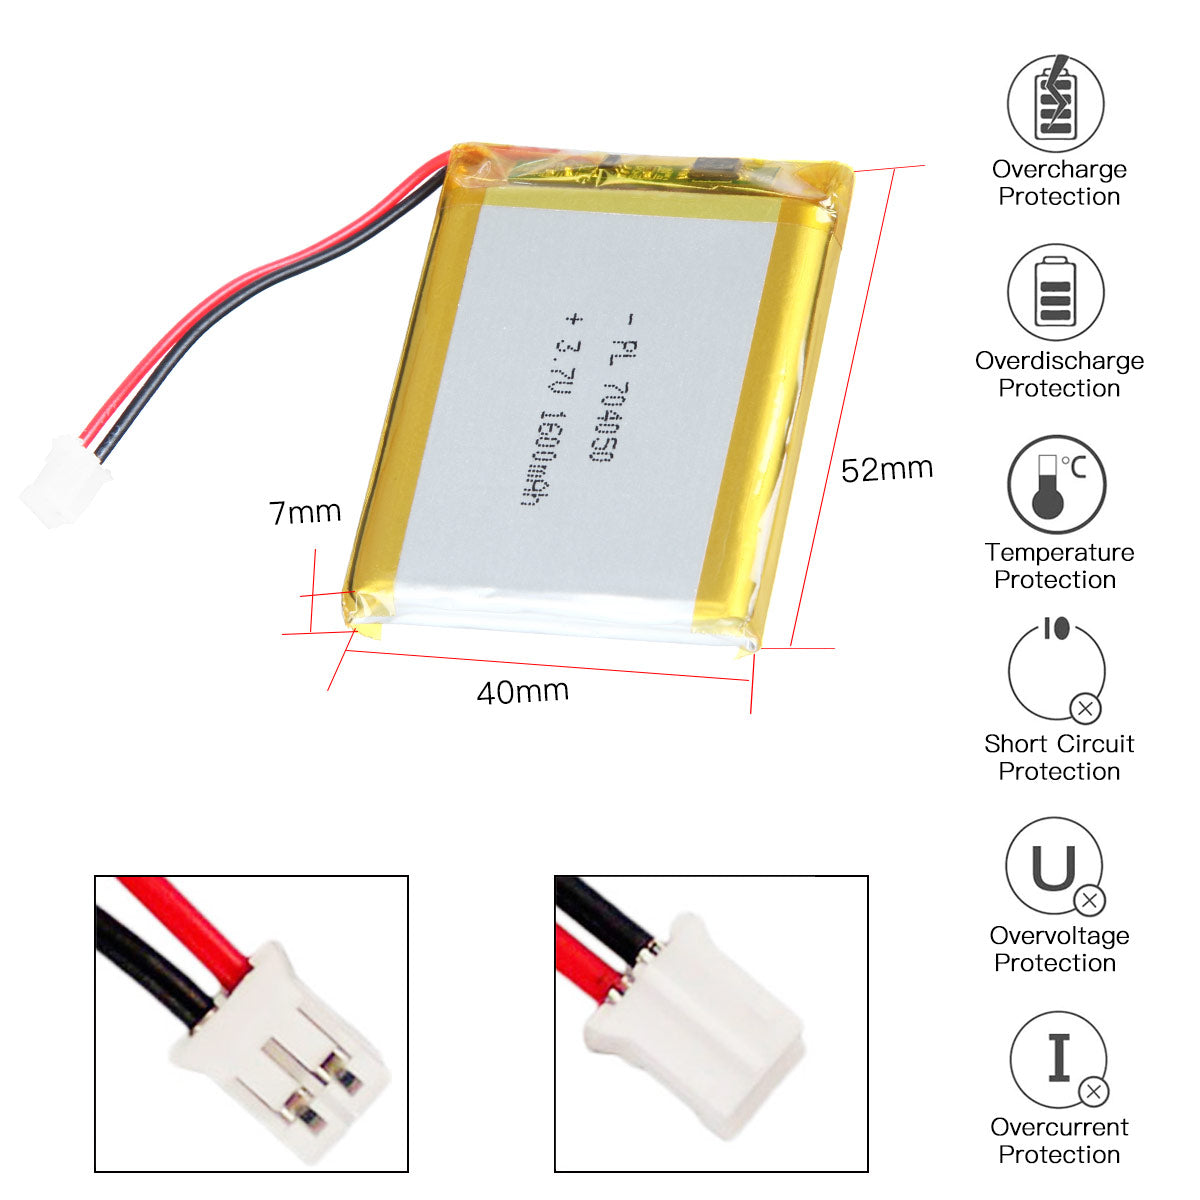 YDL 3.7V 1600mAh 704050 Rechargeable Lithium Polymer Battery